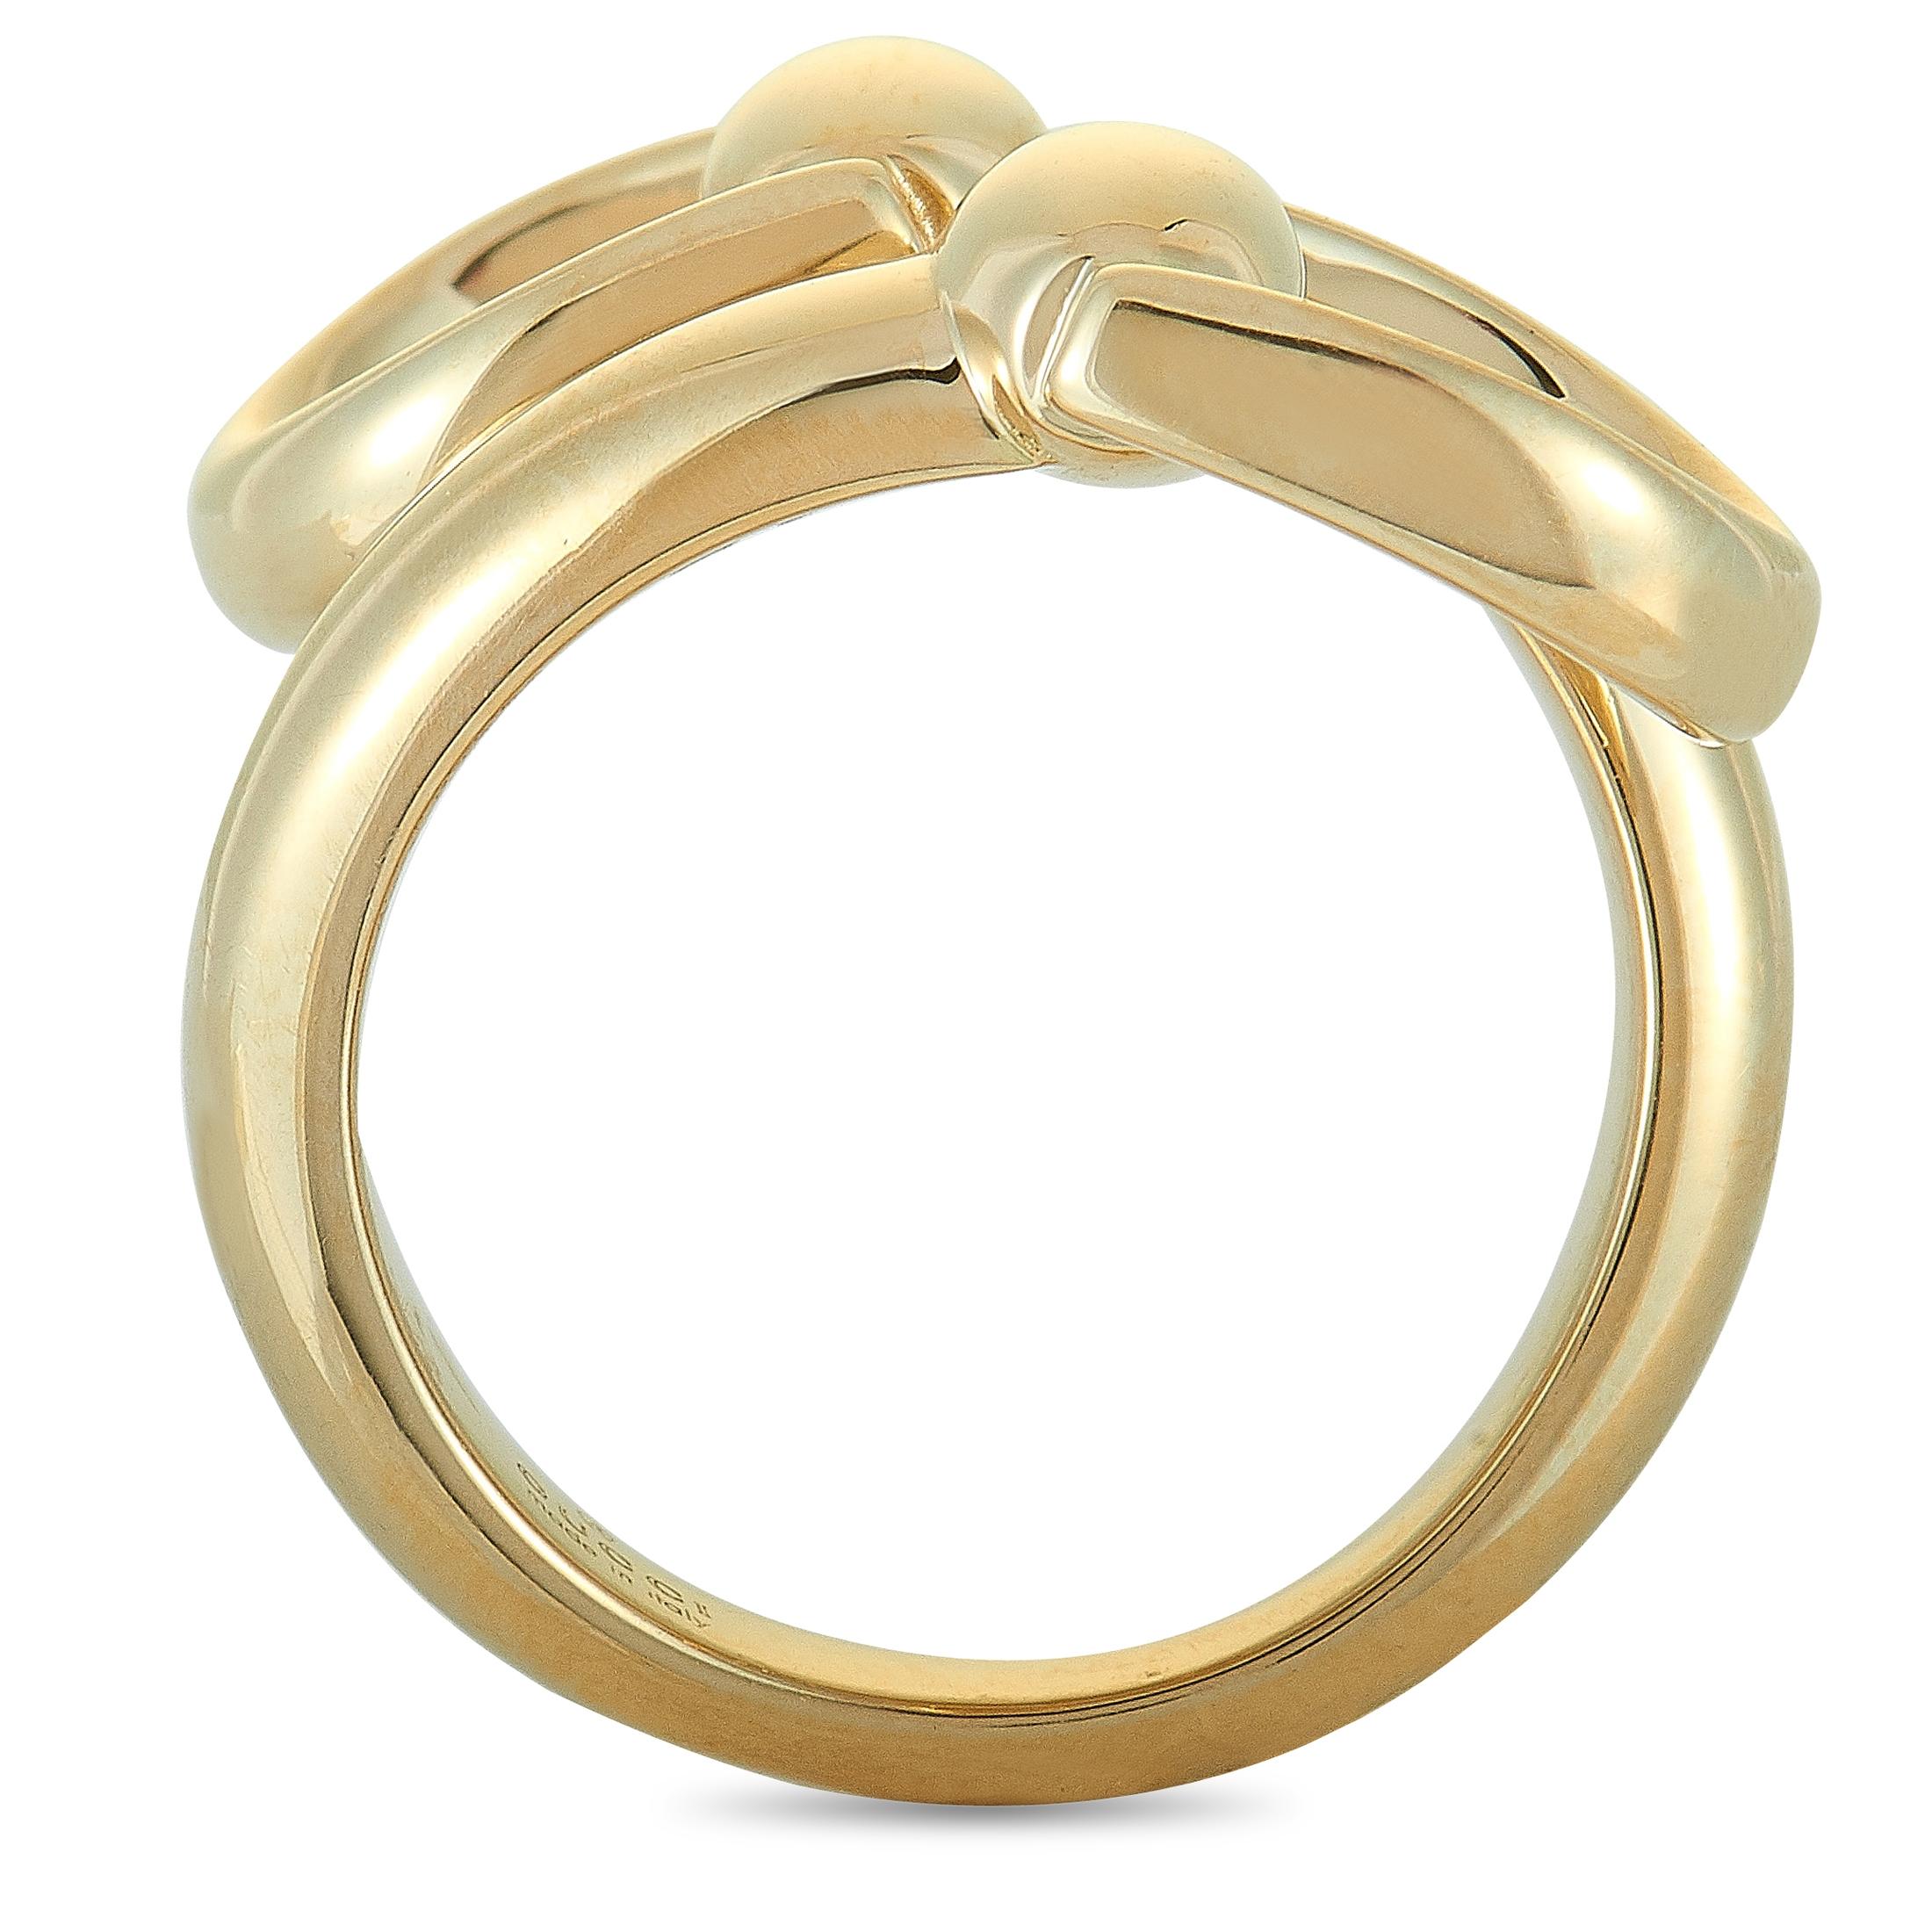 The Gucci “Horsebit” ring is crafted from 18K yellow gold and weighs 11 grams. The ring boasts band thickness of 3 mm and top height of 4 mm, while top dimensions measure 24 by 18 mm.

This item is offered in brand new condition and includes the